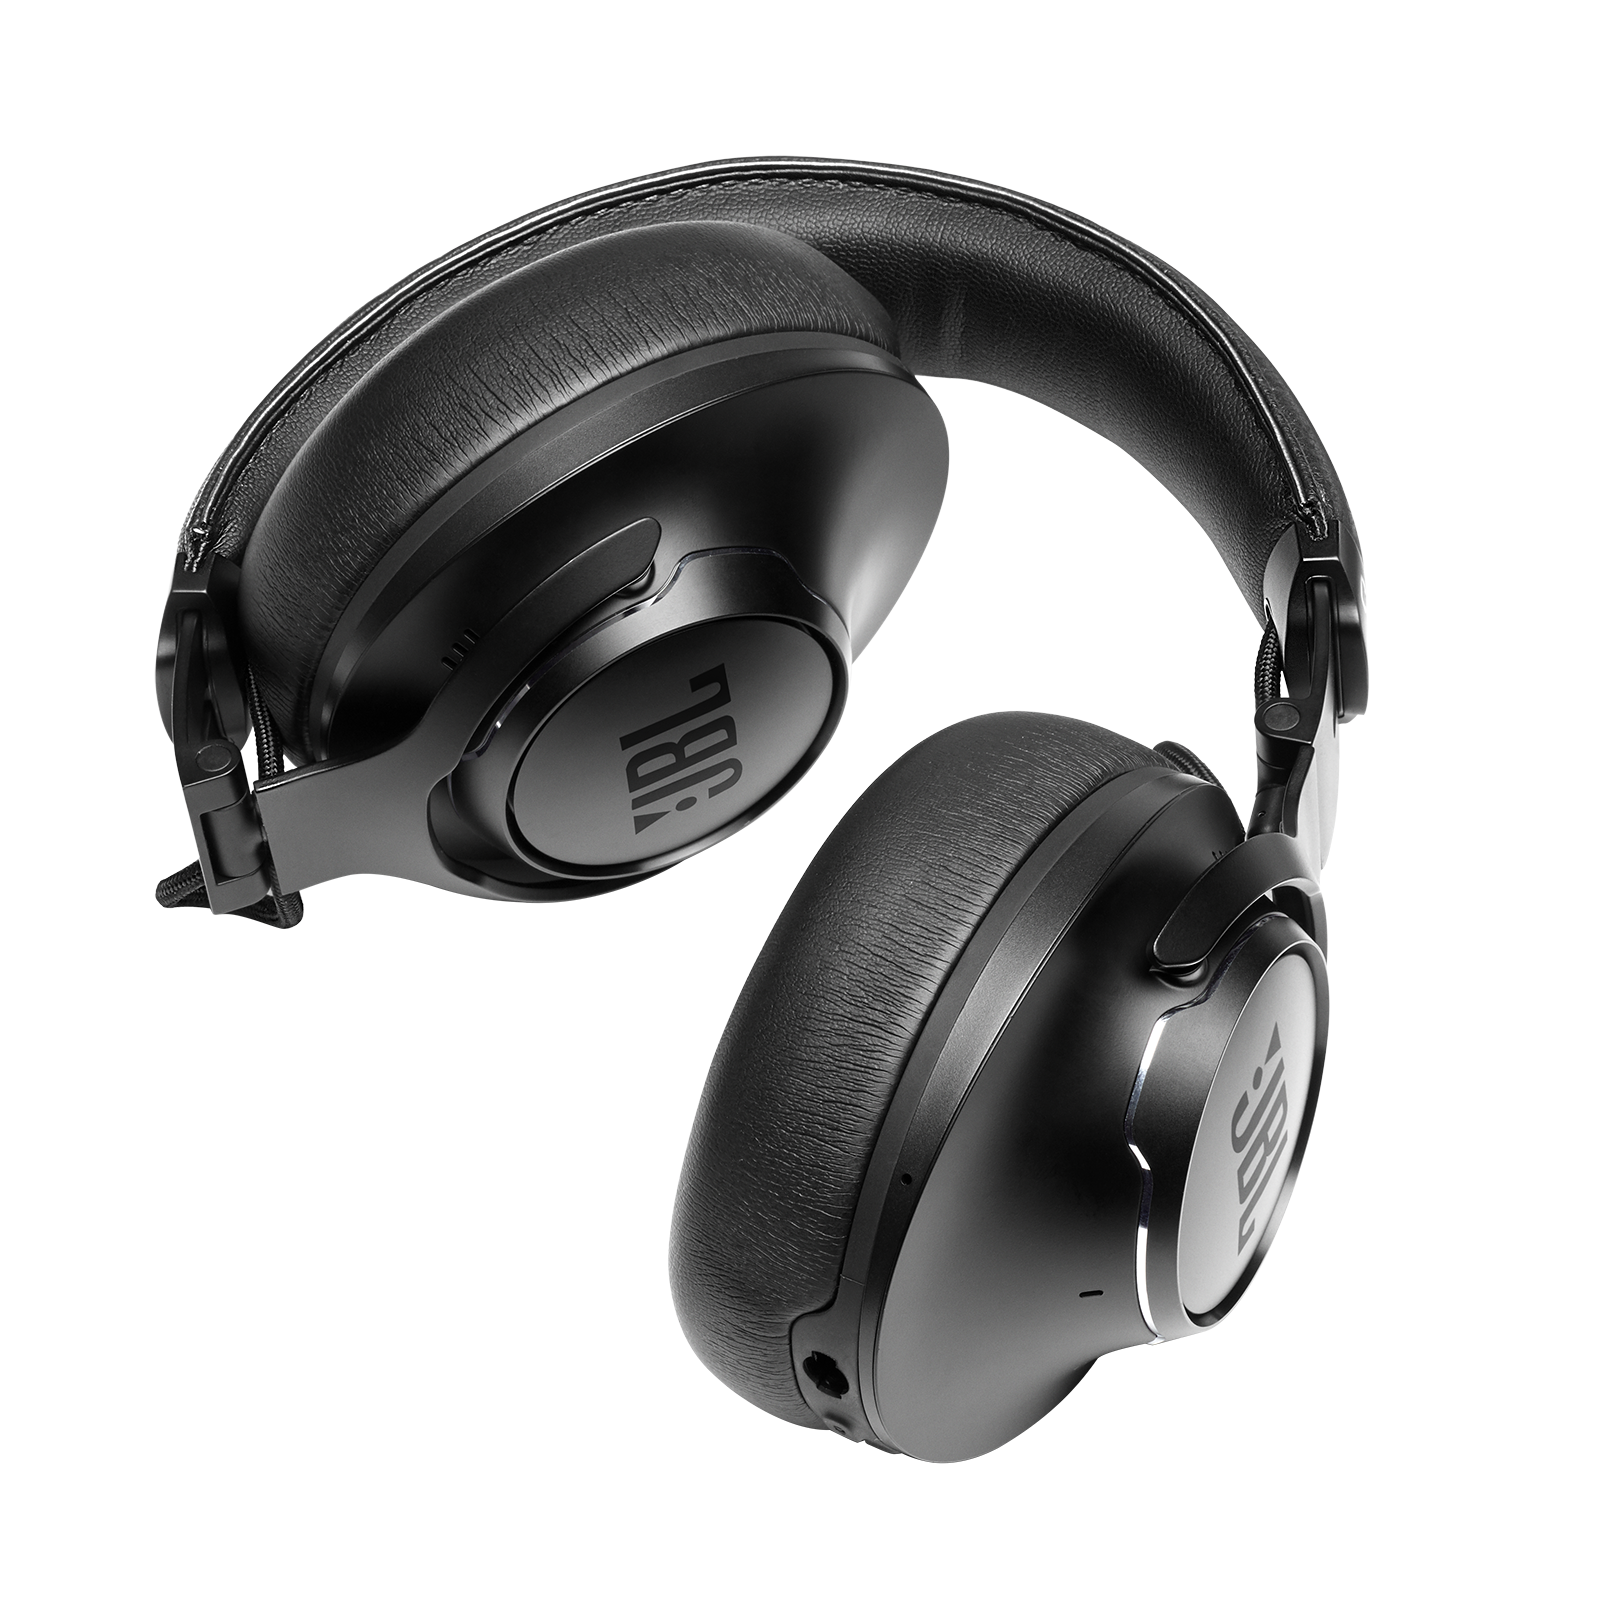 JBL CLUB ONE - Black - Wireless, over-ear, True Adaptive Noise Cancelling headphones inspired by pro musicians - Detailshot 2